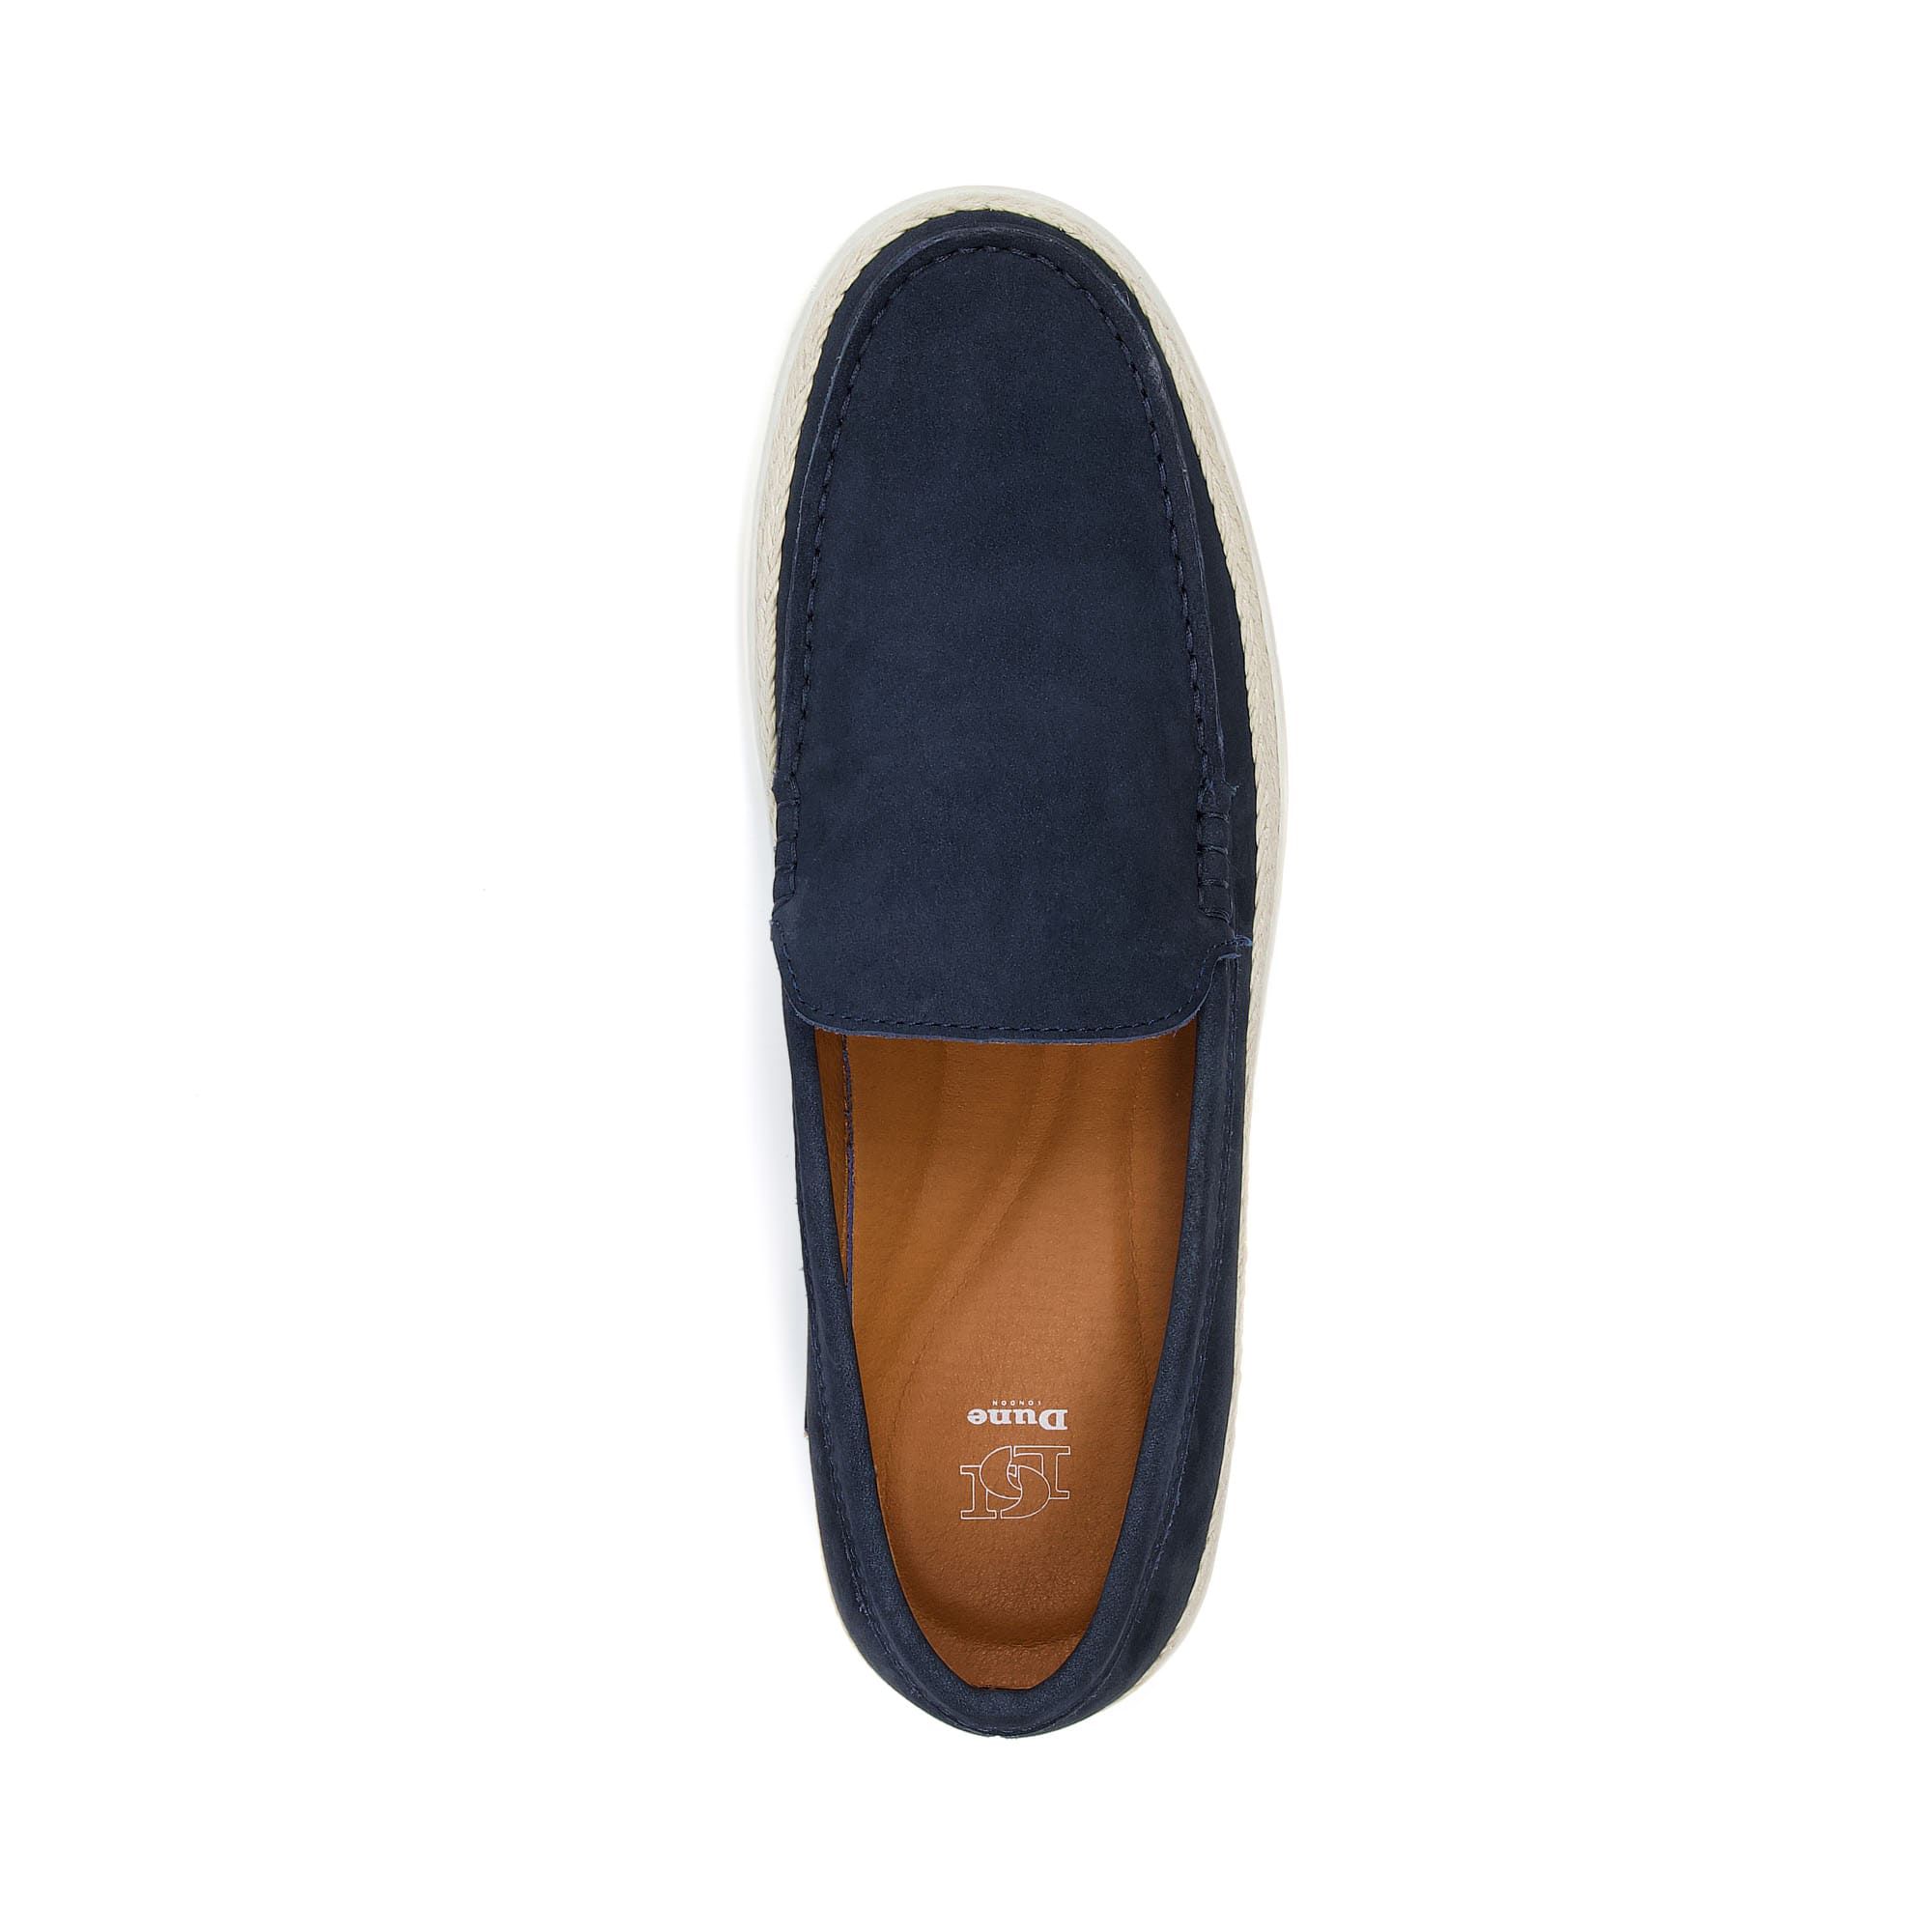 Cool and comfortable, our Brayley plimsolls will be your go-to everyday pair. This nubuck leather style slips on with ease and has a woven midsole.